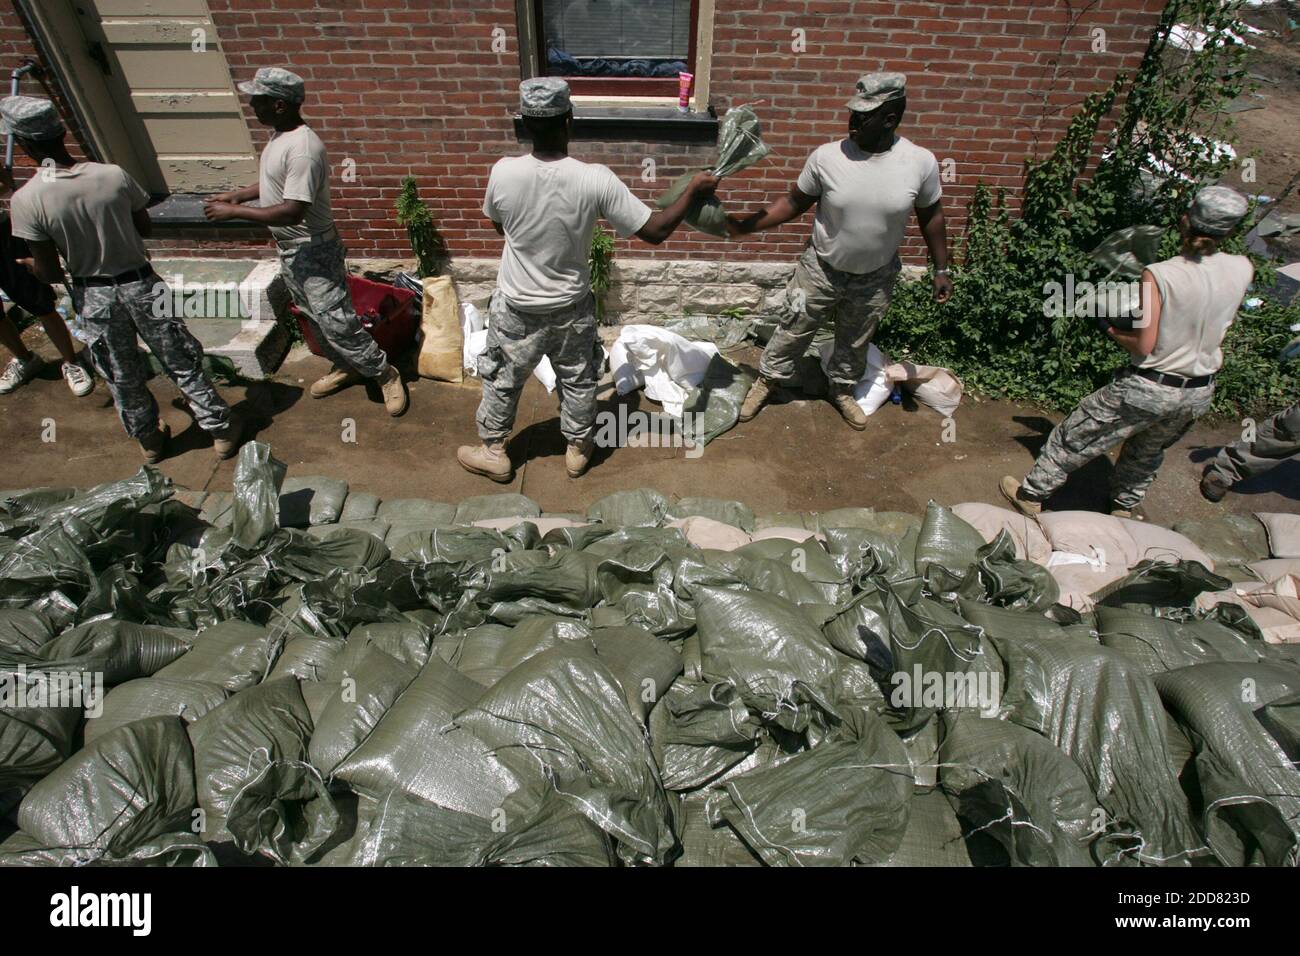 NO FILM, NO VIDEO, NO TV, NO DOCUMENTARY - Missouri National Guard soldiers help volunteers to pile up sandbags at the Mississippi River waterfront in downtown Clarksville, MO, USA on Thursday, June 19, 2008. Photo by Kuni Takahashi/Chicago Tribune/MCT/ABACAPRESS.COM Stock Photo